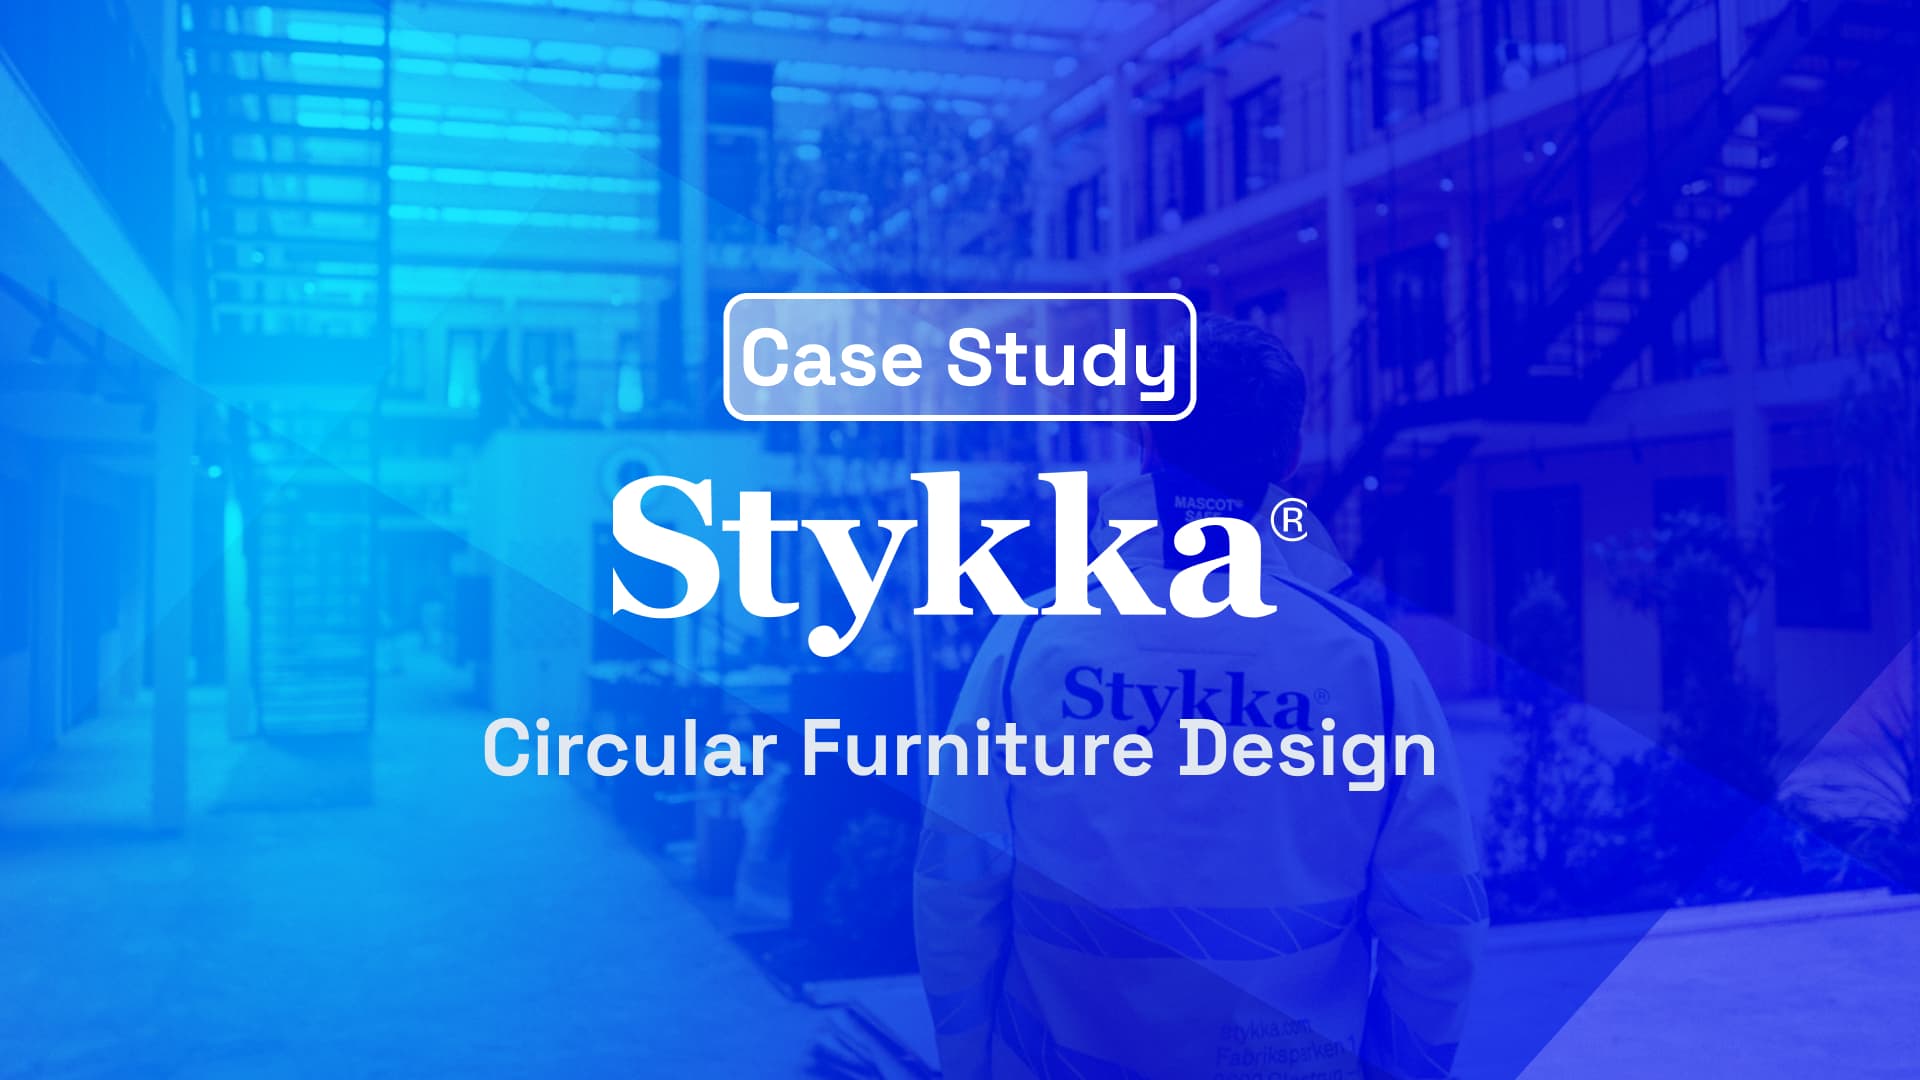 Enabling Circular Furniture with Stykka and Speckle